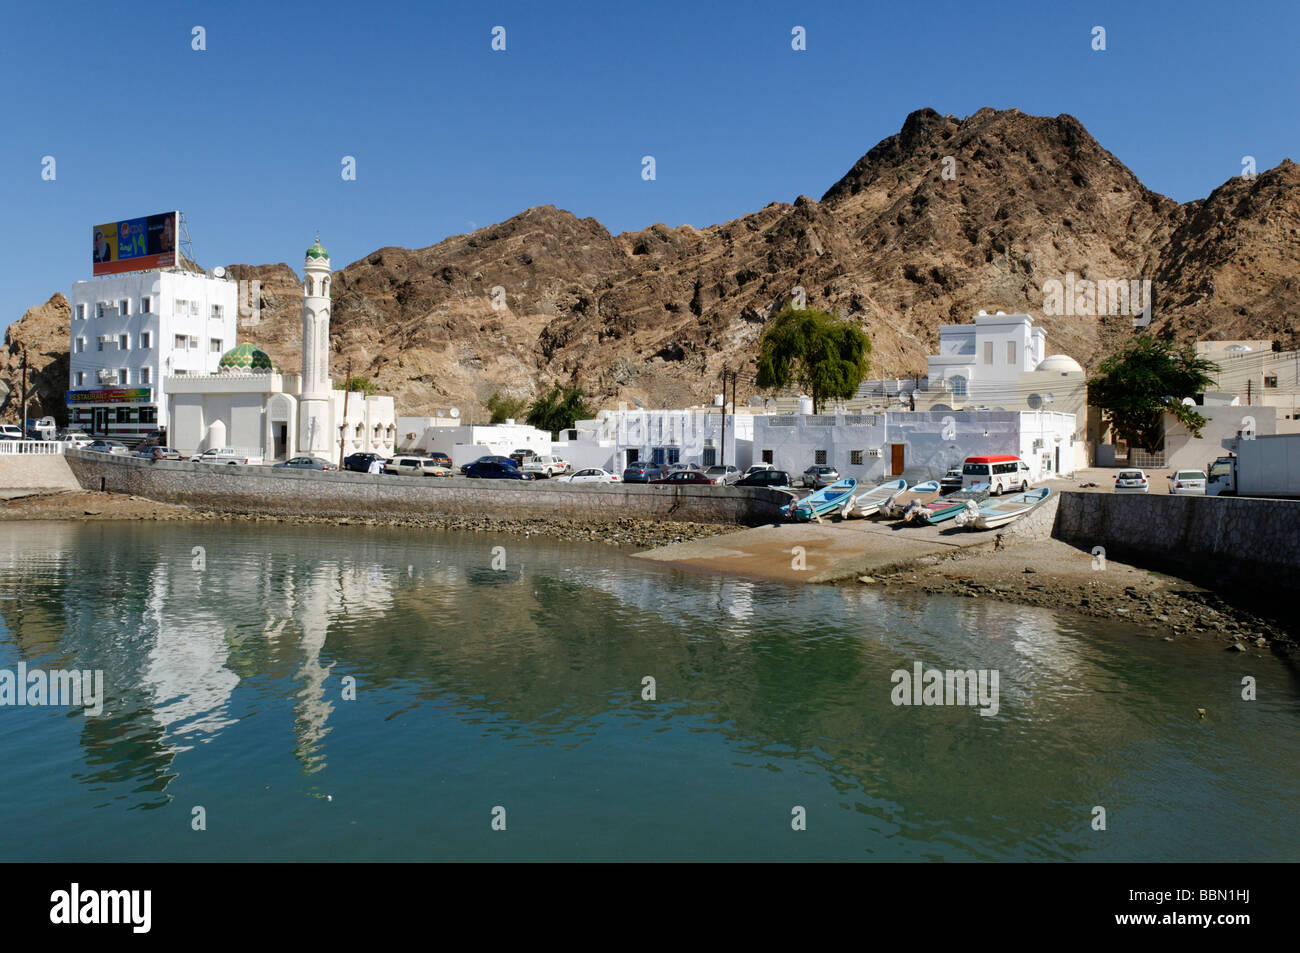 Little fishing harbor in Mutrah, Muscat, Sultanate of Oman, Arabia, Middle East Stock Photo